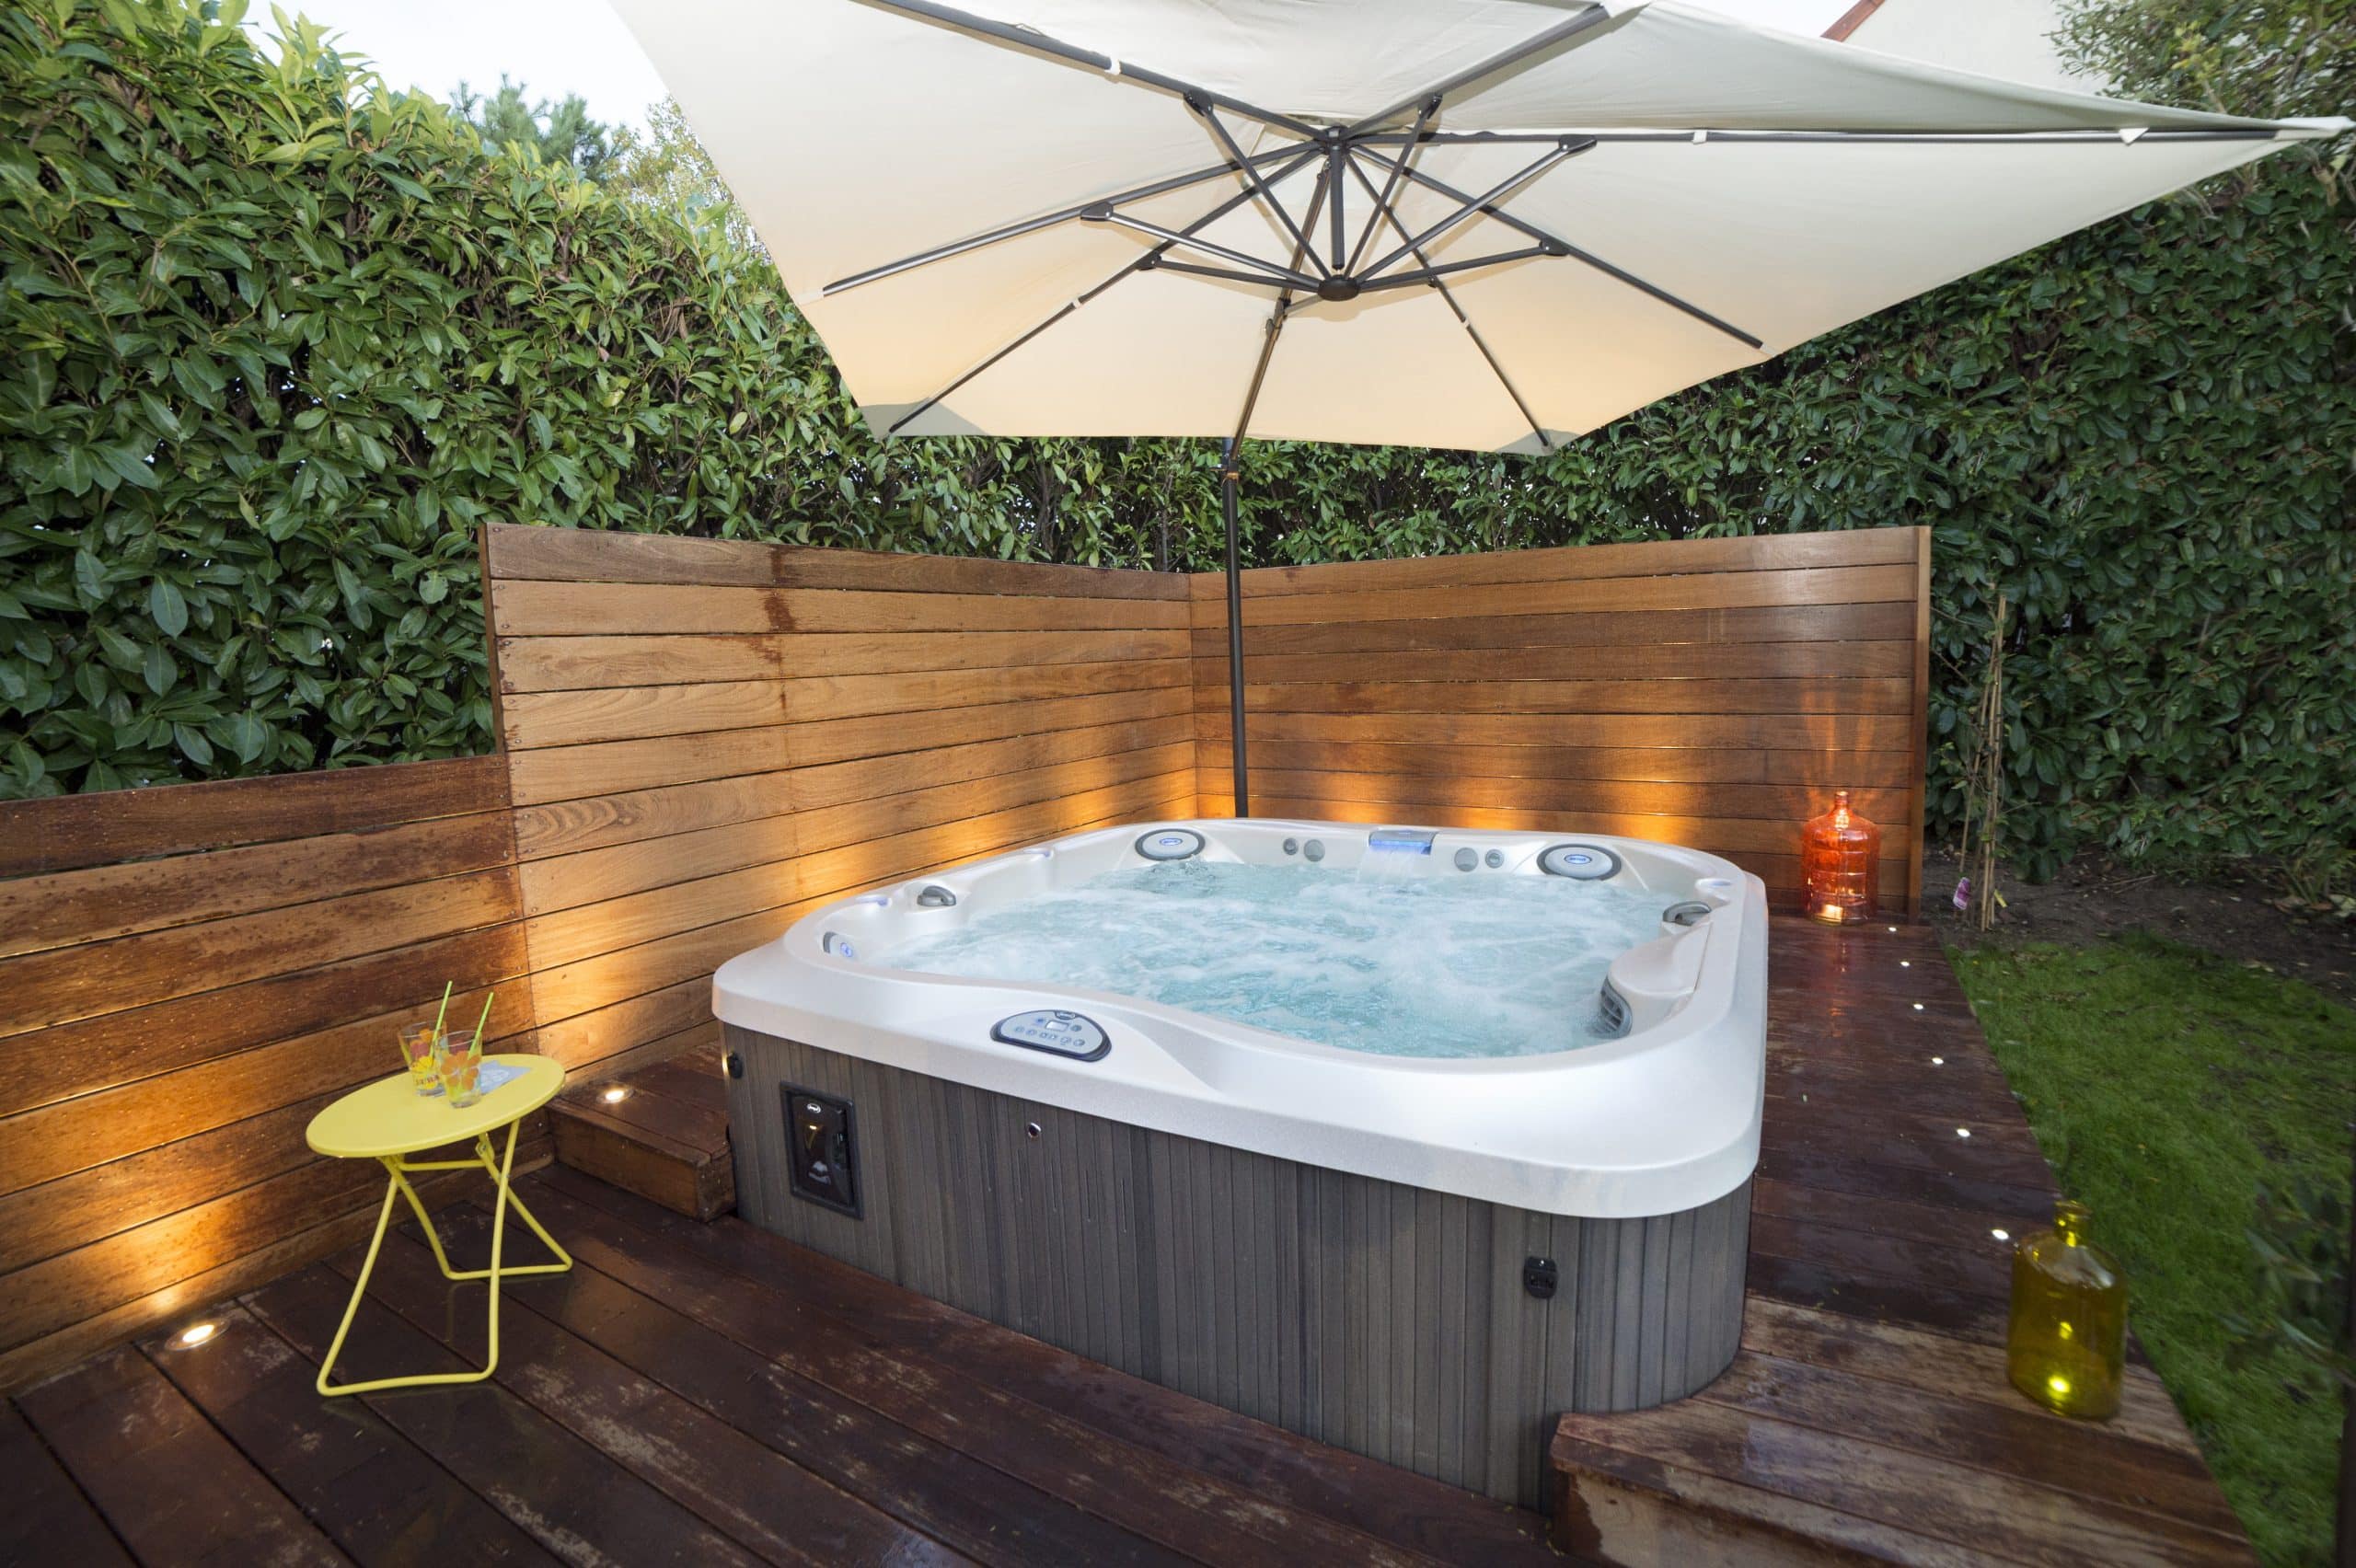 Jacuzzi hot tub in a backyard patio with chairs and umbrella